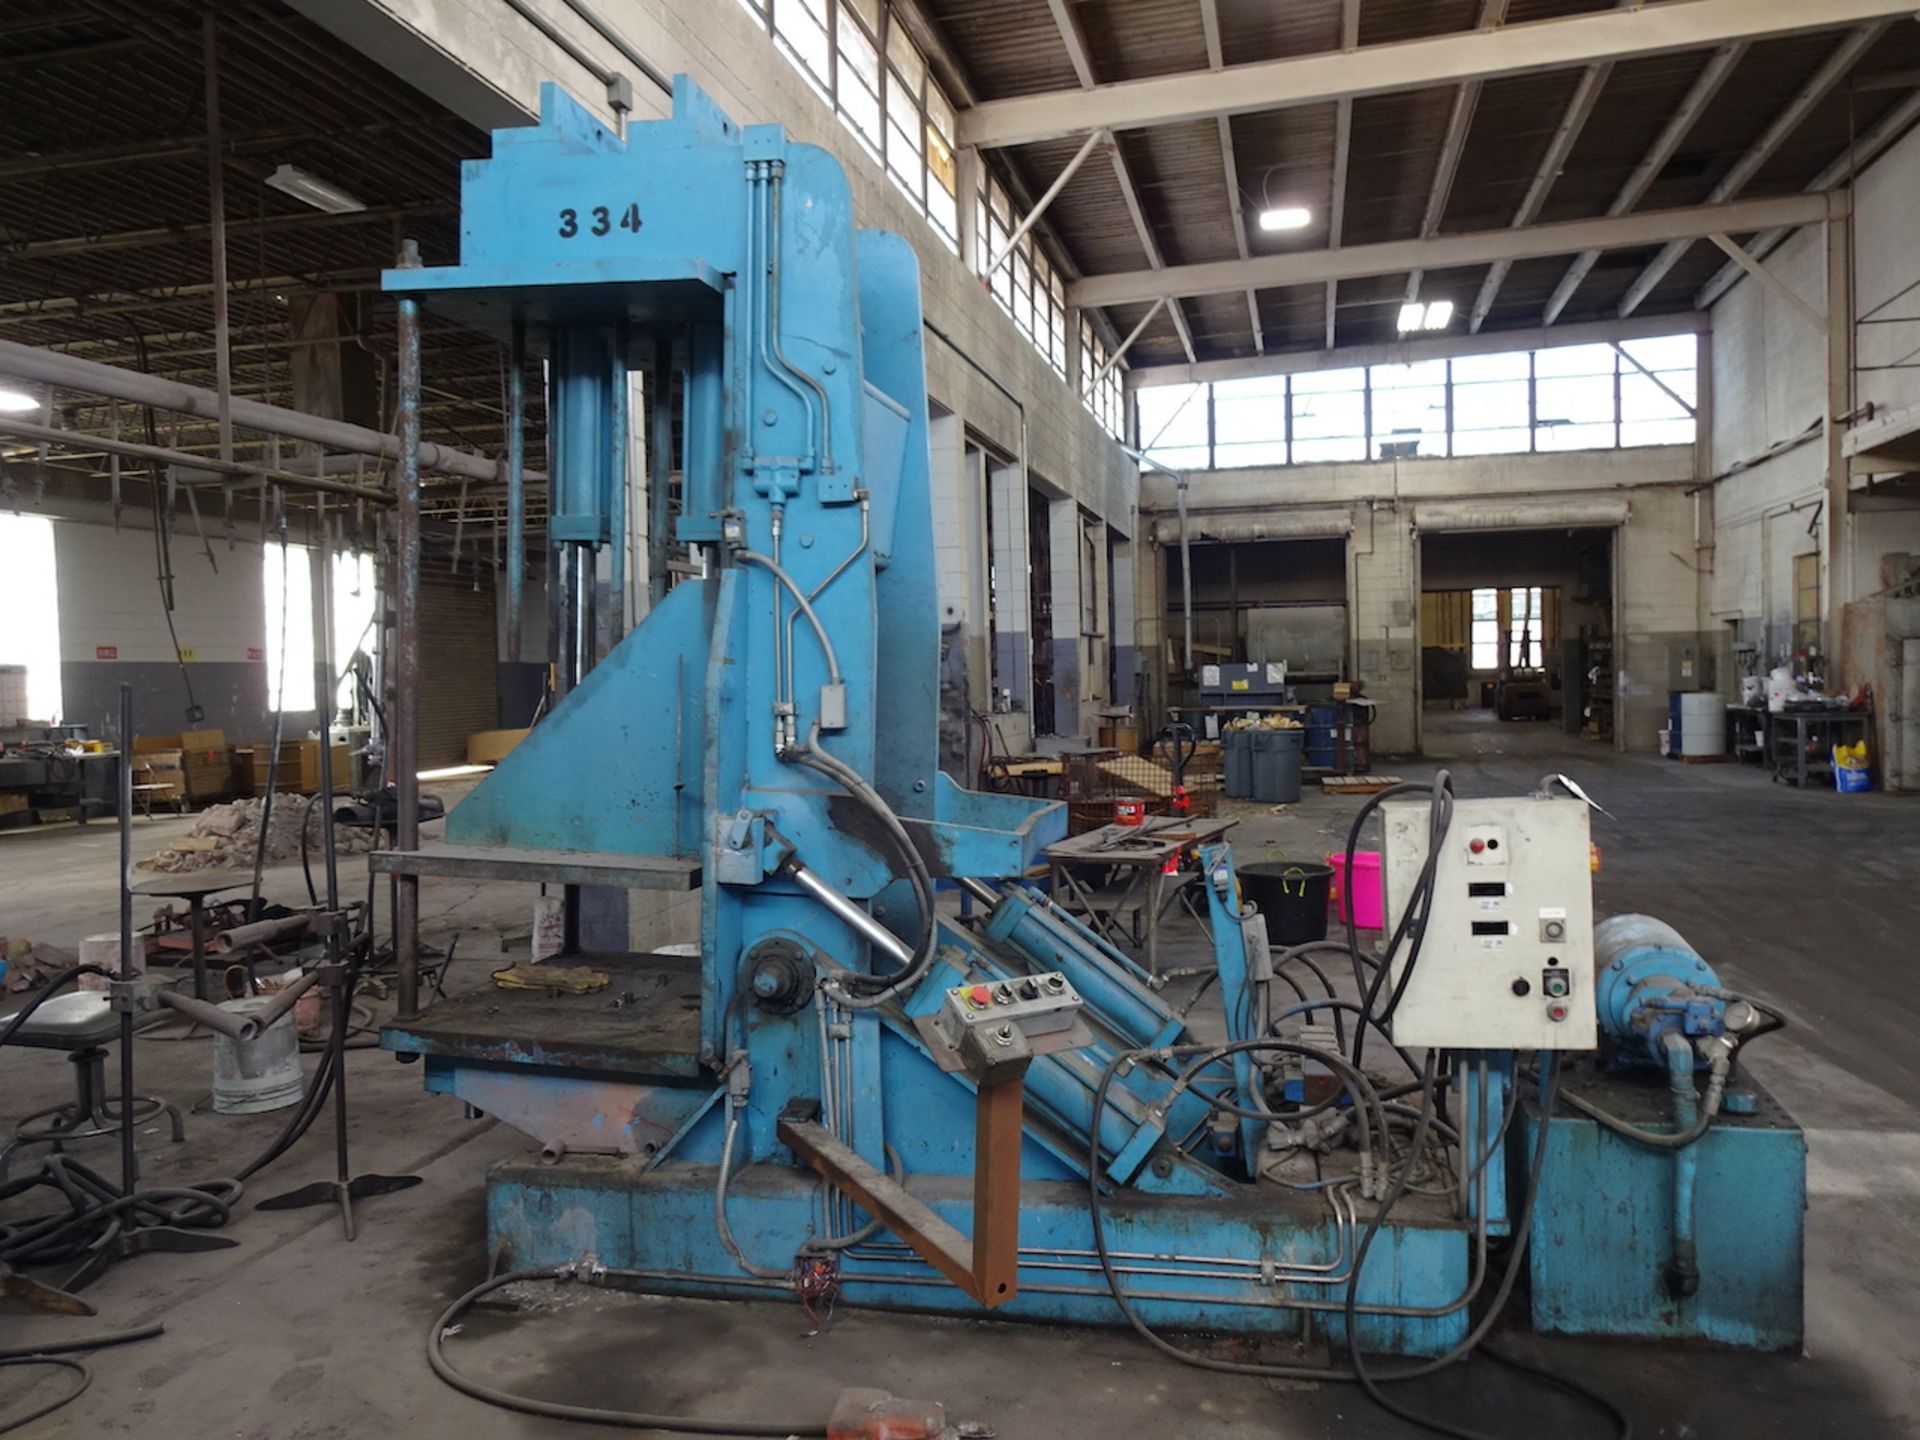 STAHL TILT & POUR PERMANENT MOLD GRAVITY DIE CASTING MACHINE, 42 IN. x 36 IN. (APPROXIMATELY)